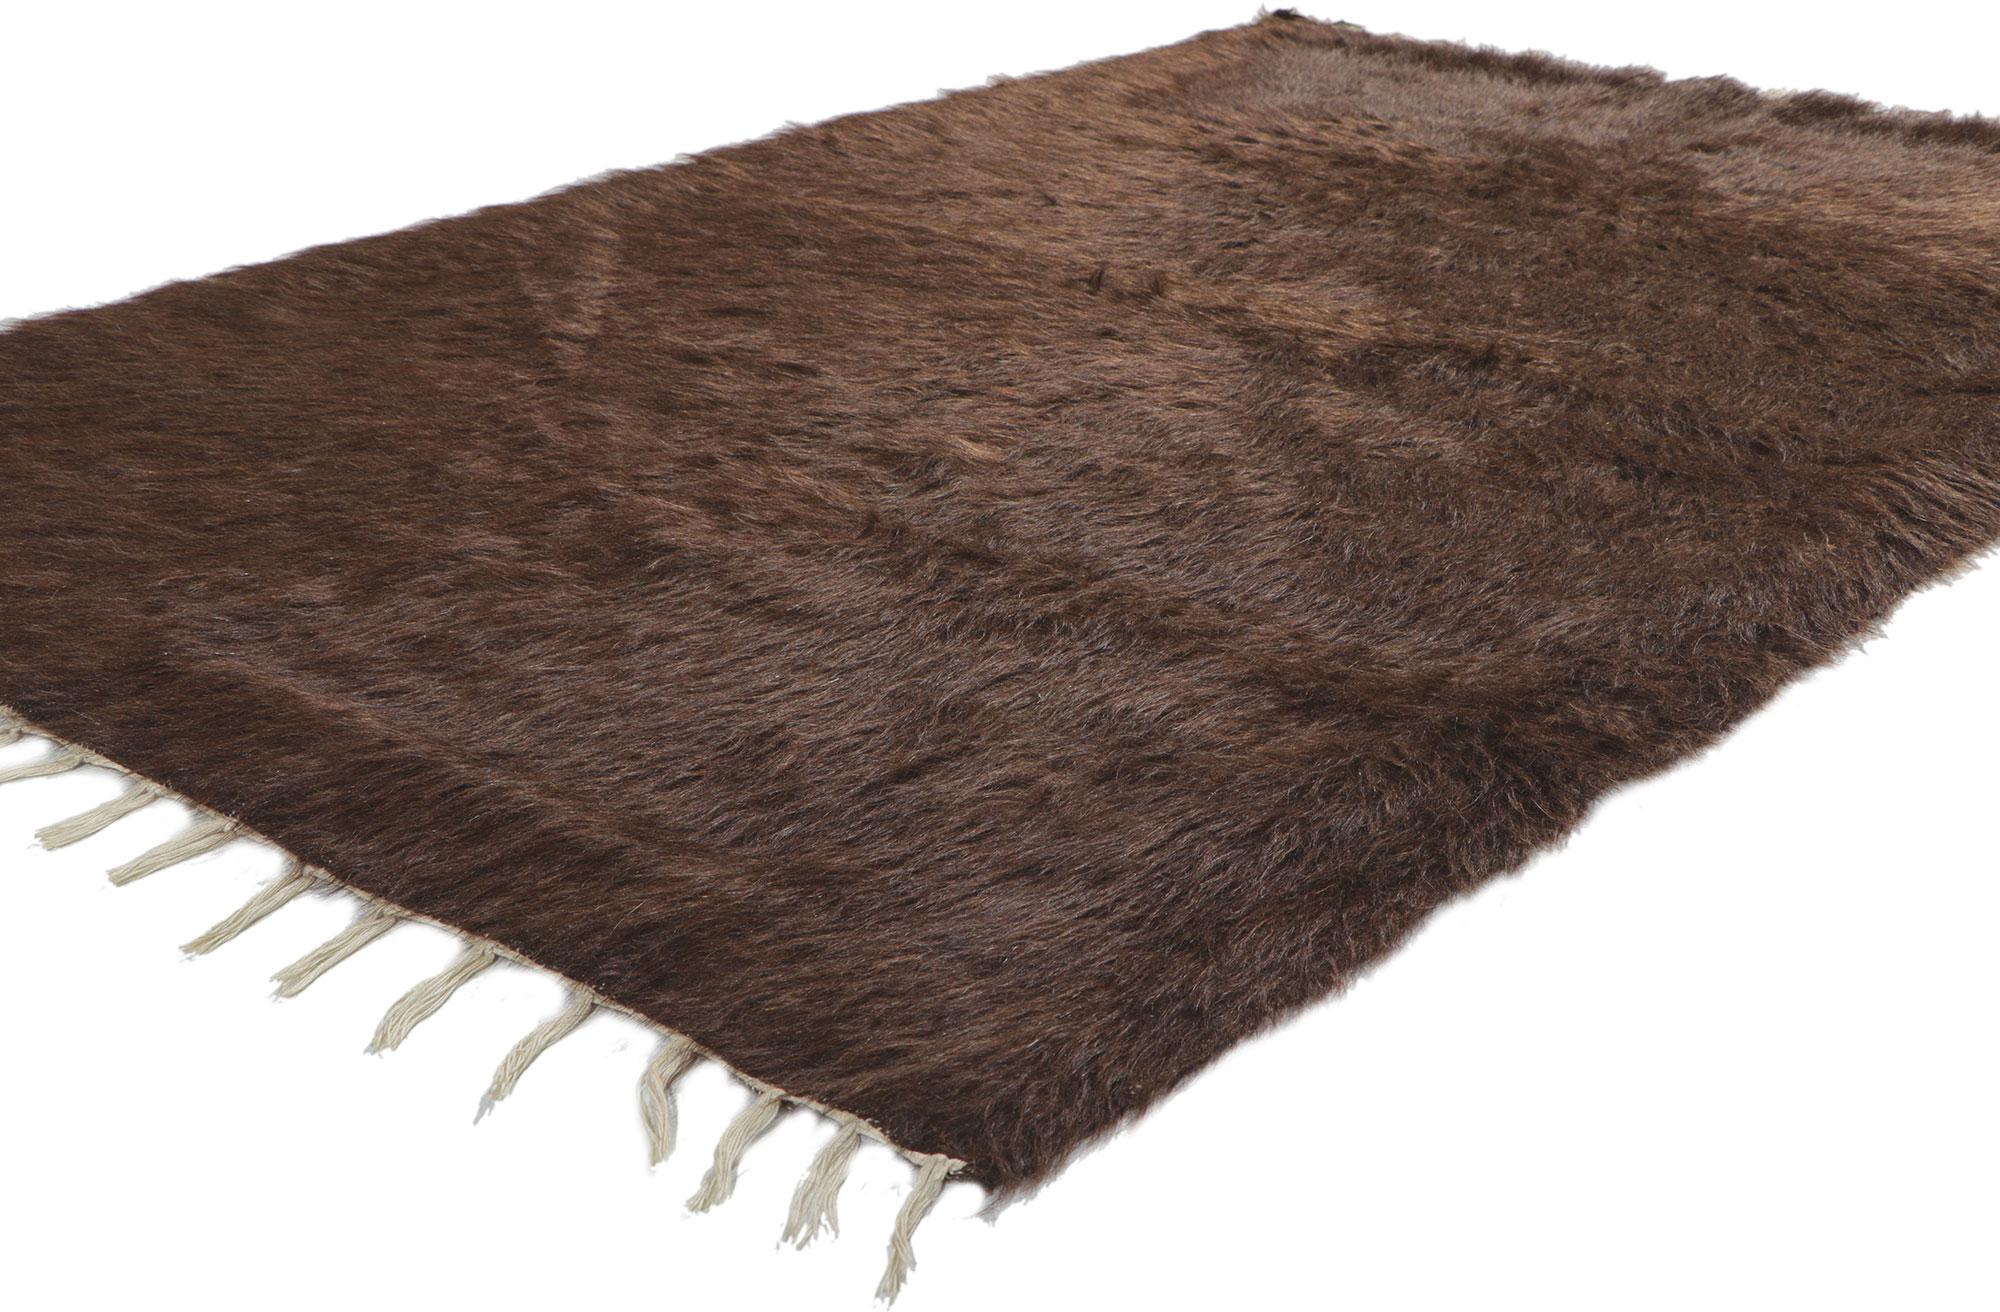 53839 Vintage Turkish Angora Wool Kilim Blanket Rug, 04'03 x 06'06?. With its shaggy pile, incredible detail and texture, this handwoven Turkish angora kilim rug is a captivating vision of woven beauty. The minimalist design and earthy colorway